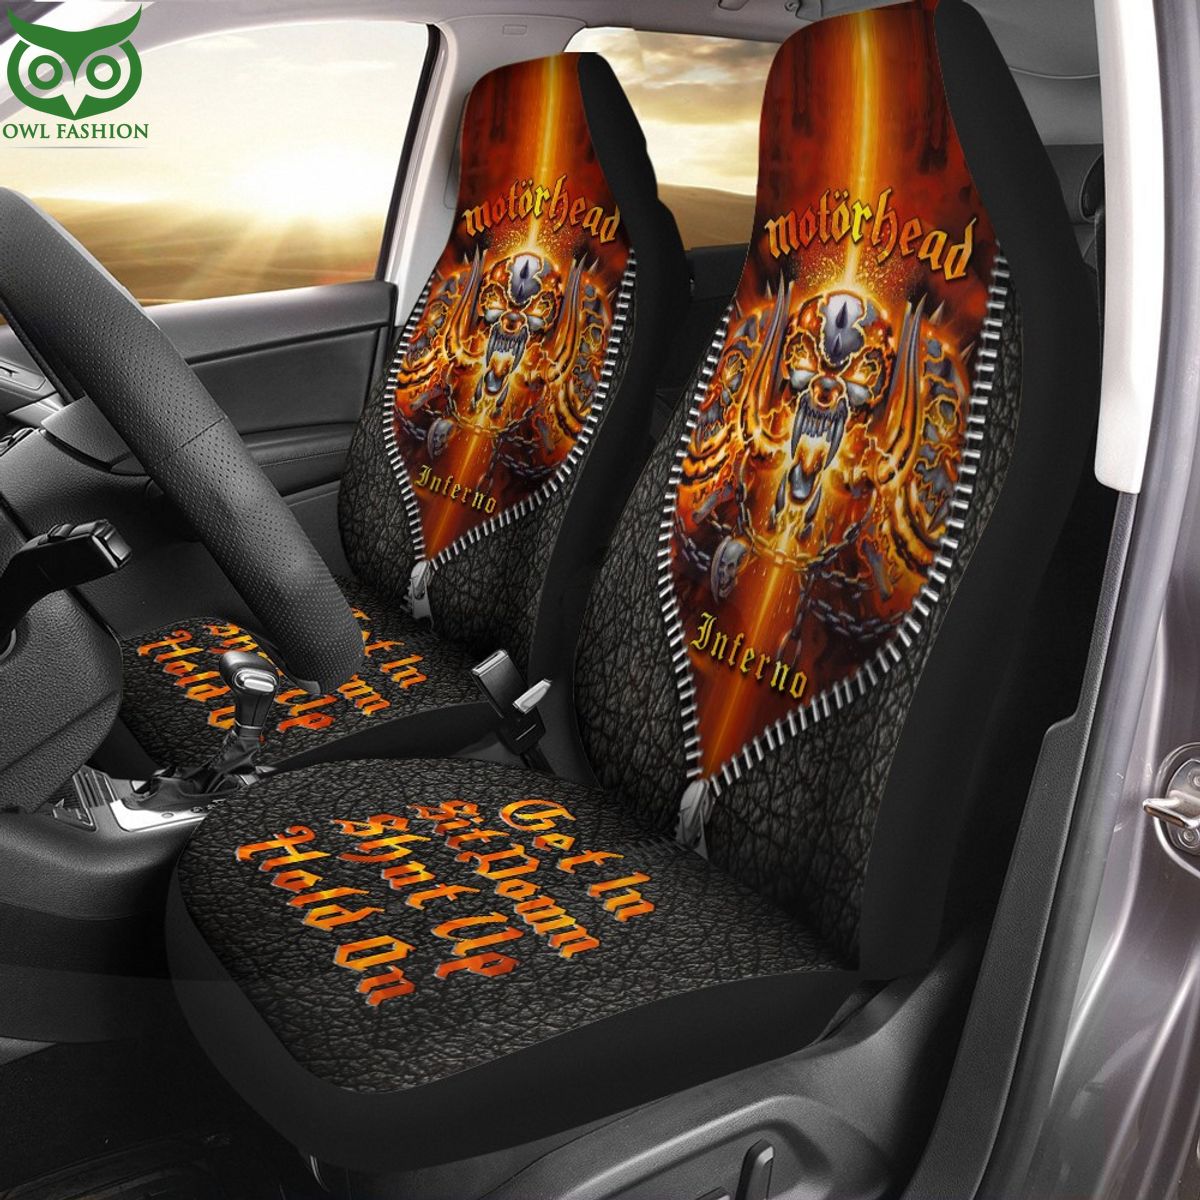 Motorhead Inferno Skull Car Seat Cover The lines and shapes are harmonious.